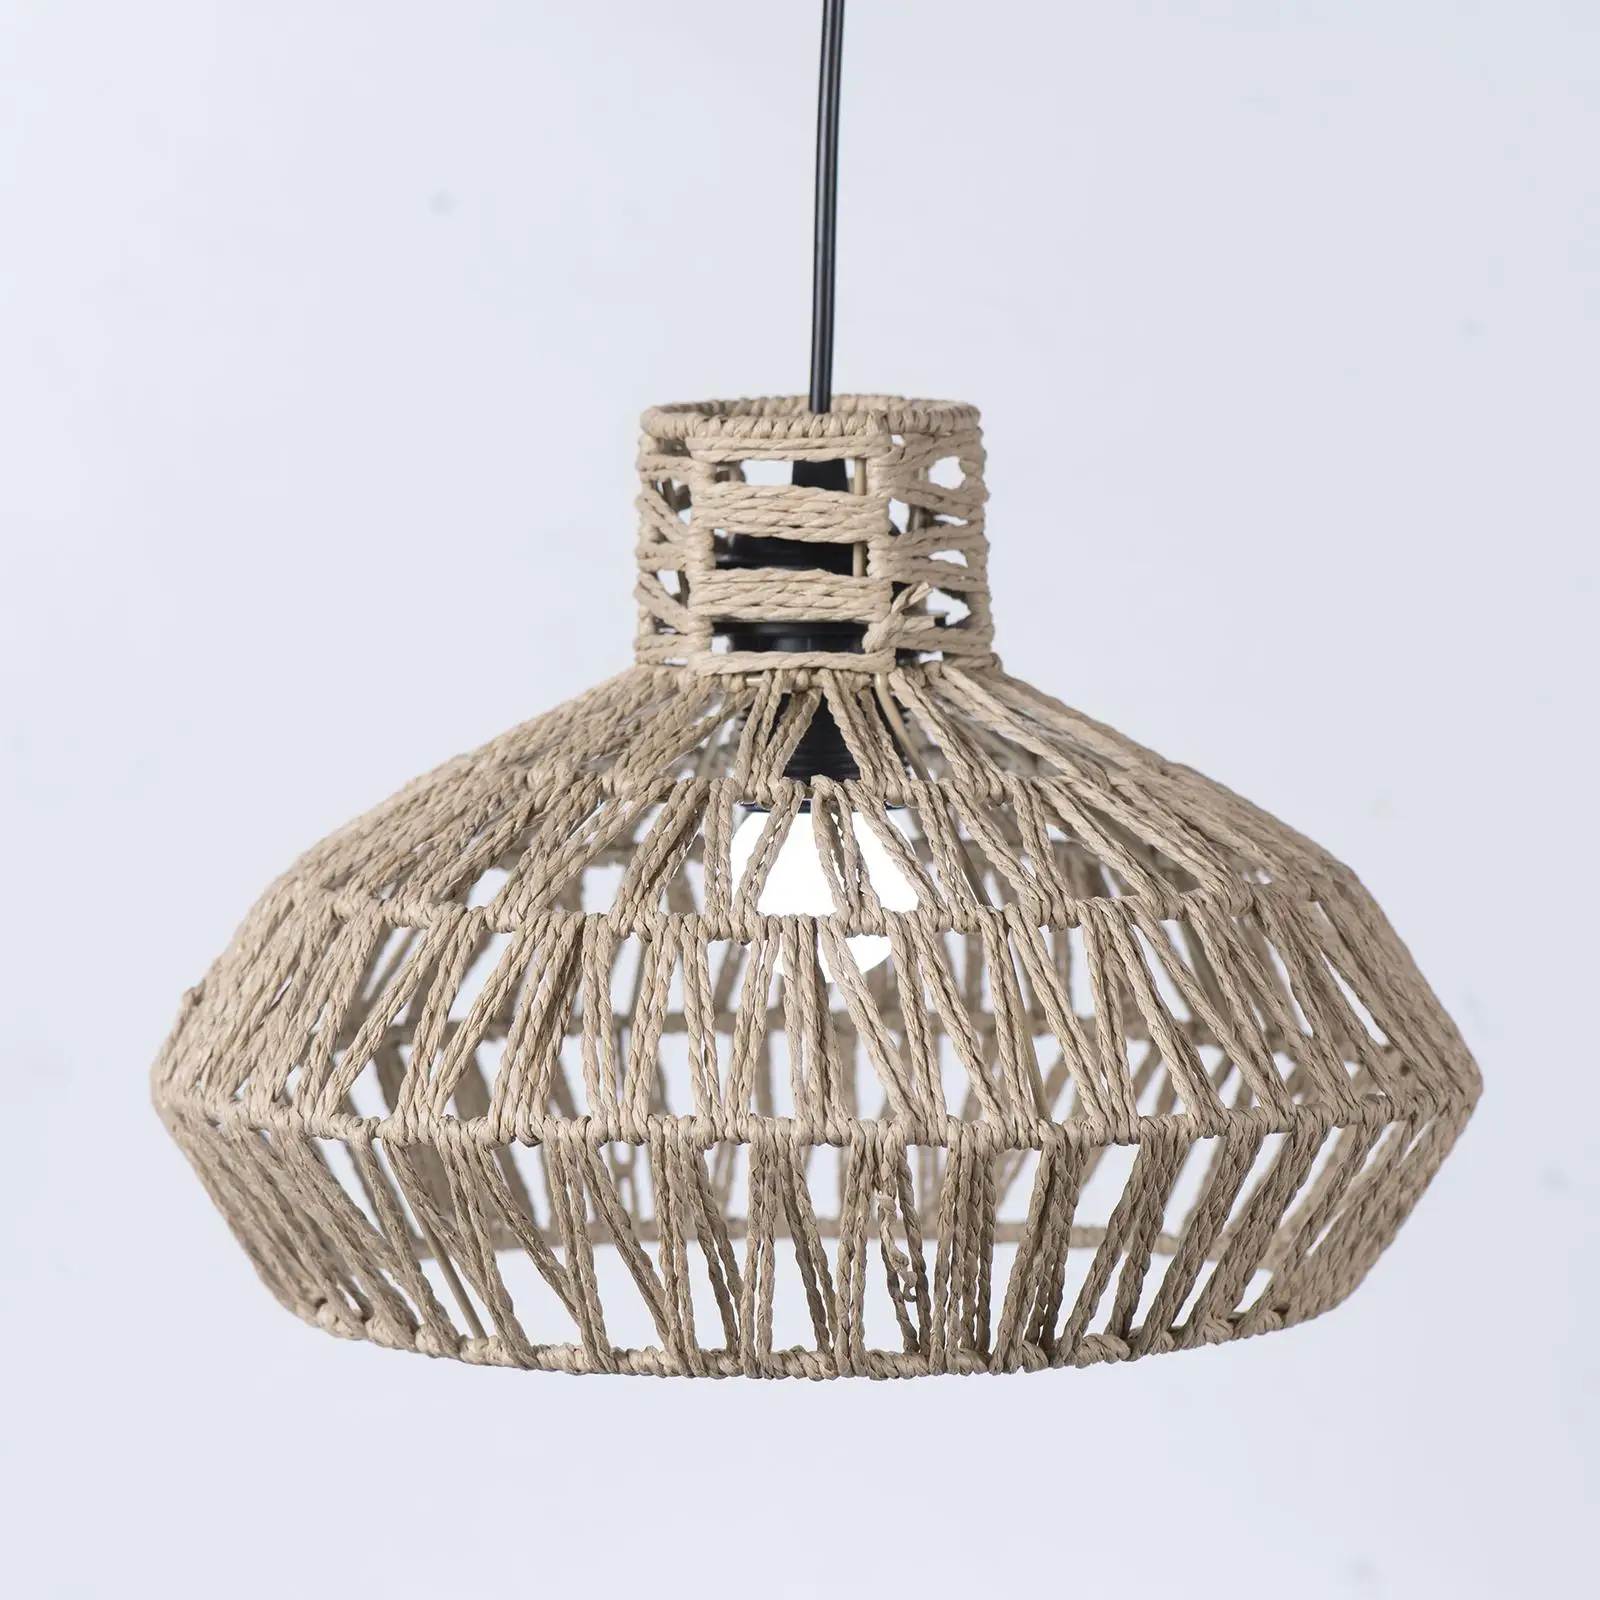 Ceiling Light Fixture Covers Floor Lamp Chandelier Covers Shades Pendant Lamp Shade Handwoven Rope Lampshade for Kitchen Island